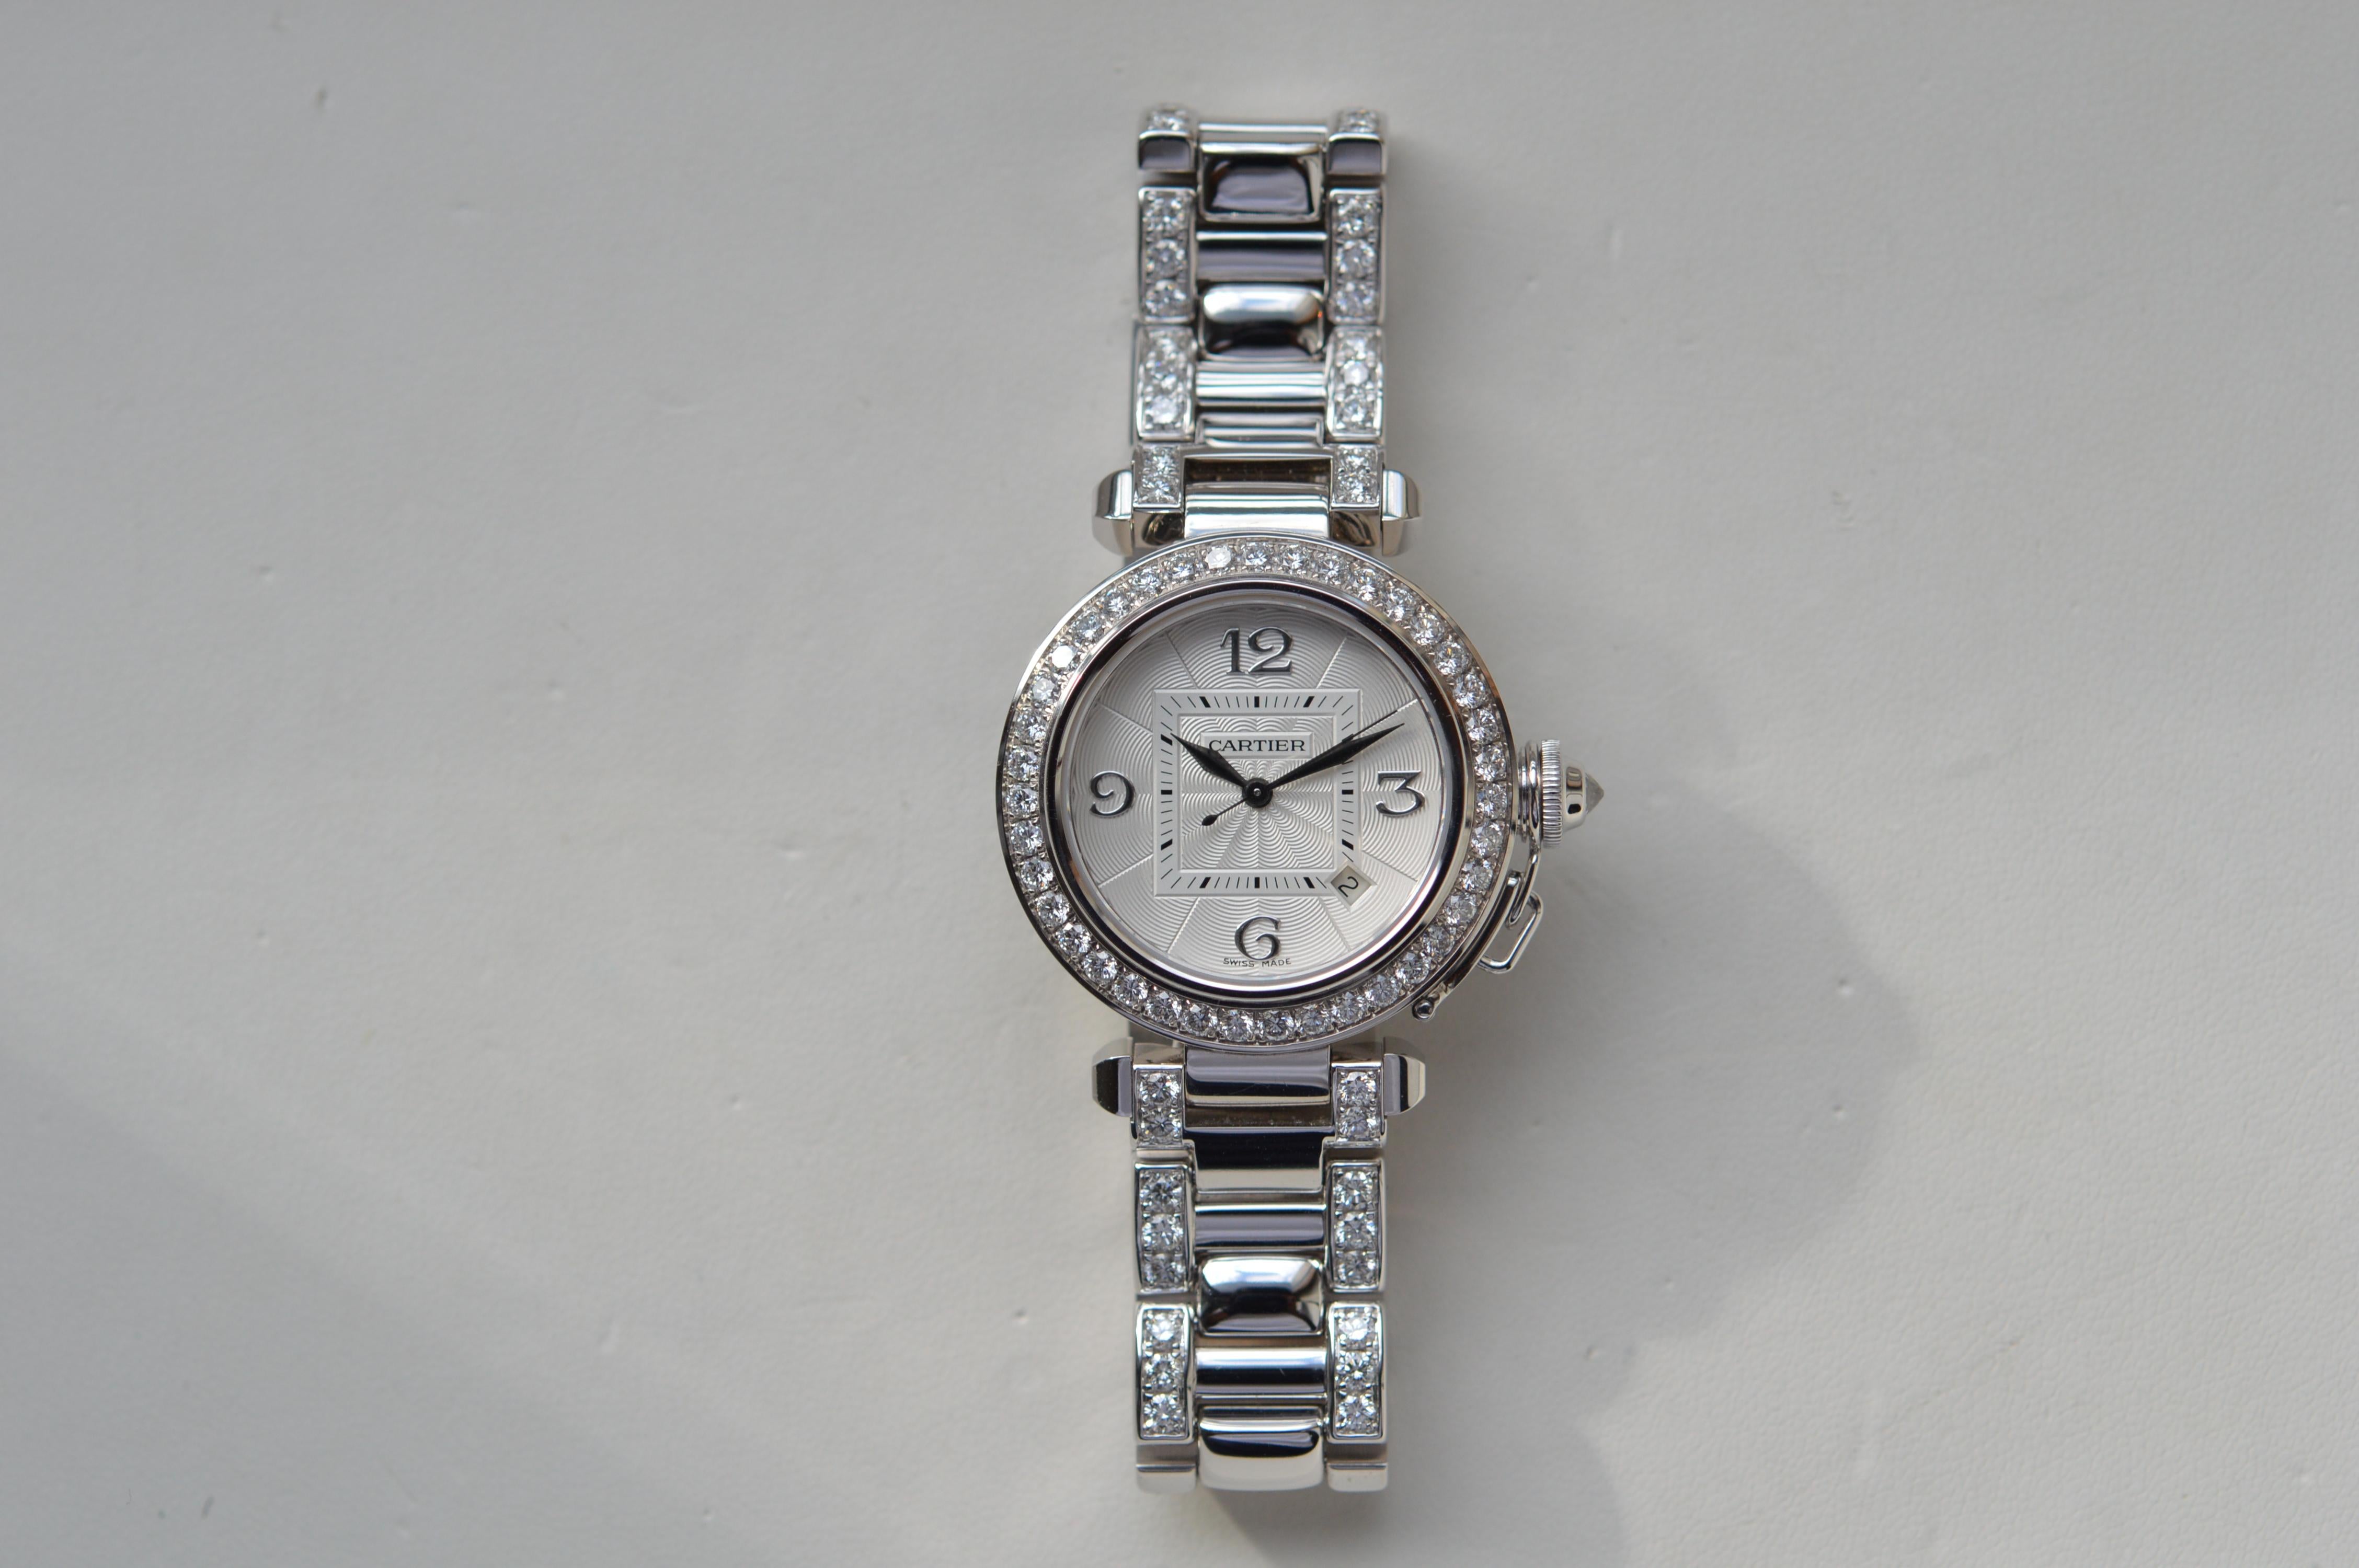 Cartier Pasha 32mm Pavé Bezel and Bracelet end Link
Reference n° WJ1116LK
32mm Size
18K White Gold
Open Back case
Automatic Movement
Original Cartier Diamond Settings
Set with a total of 132 Diamonds for a weight of 6.61 carats
Case & Crown 1.81